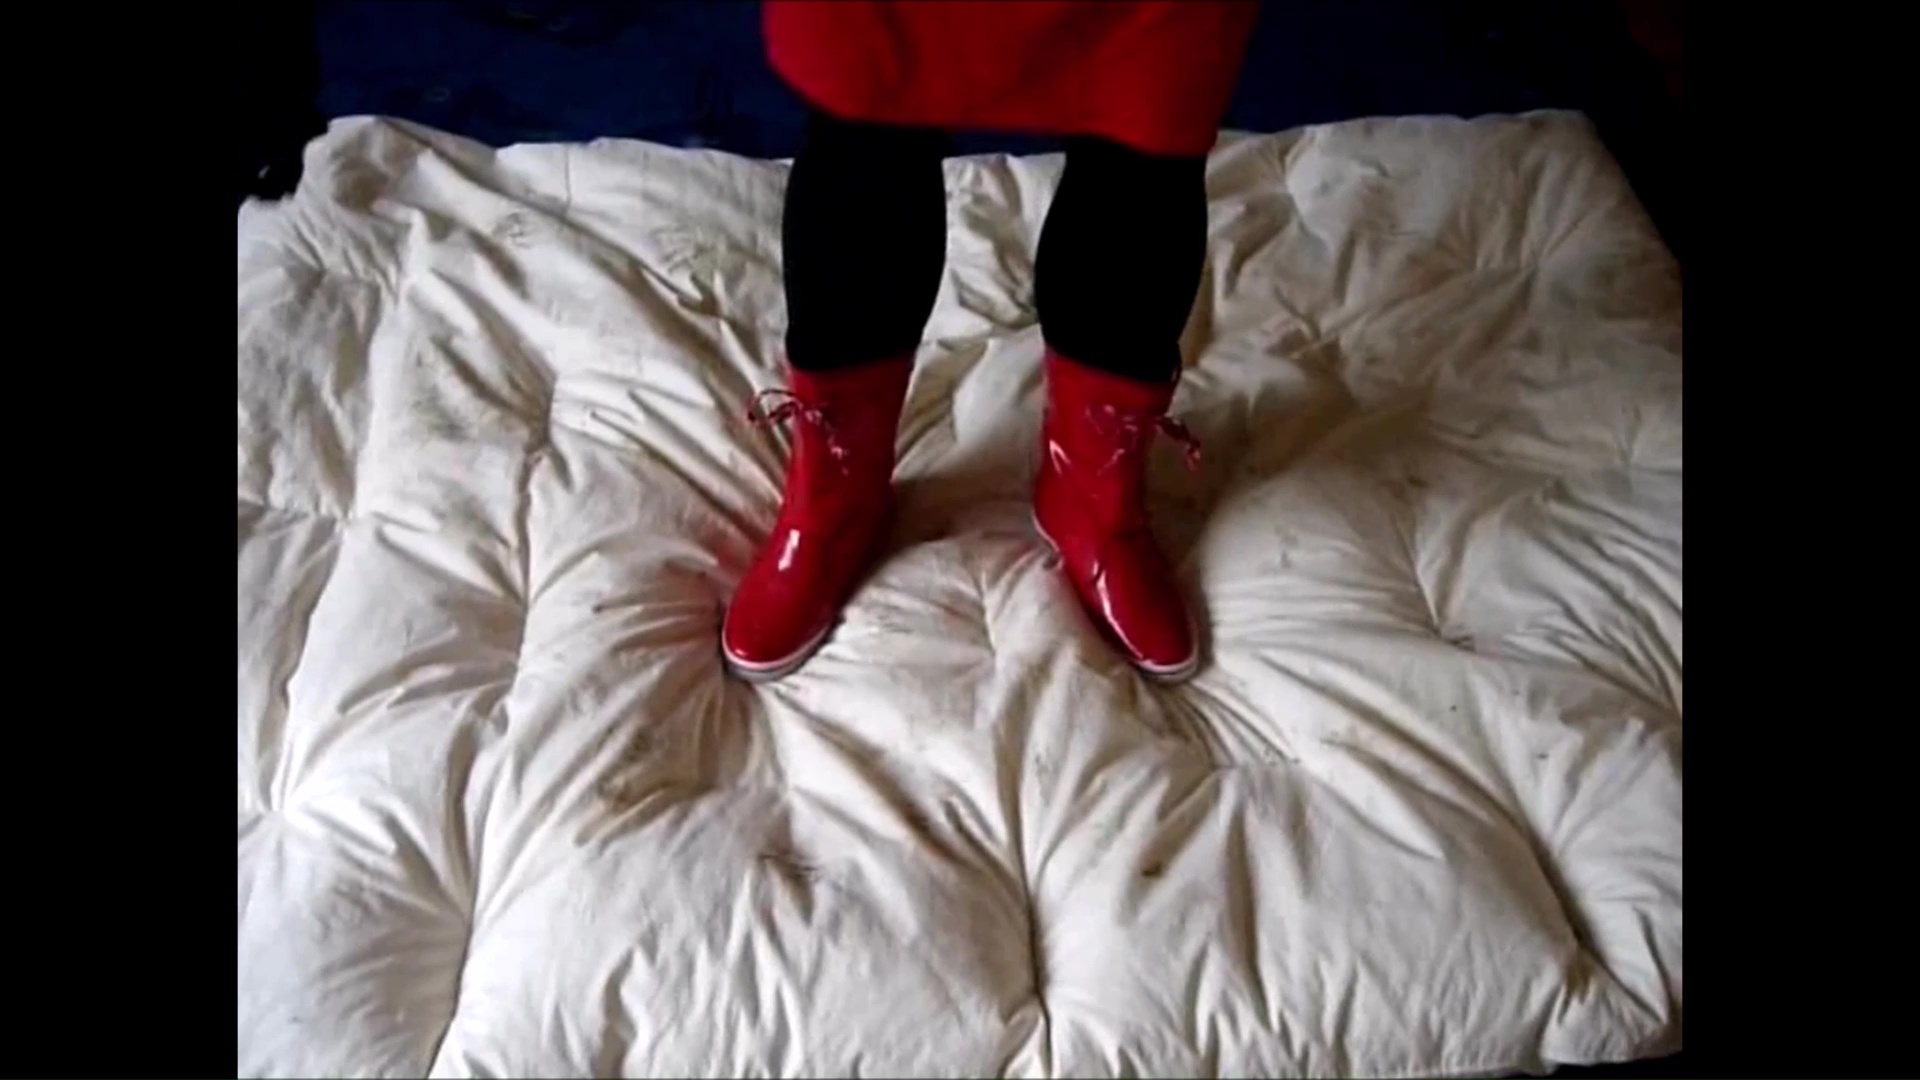 Jana tramples on duvet with different boots trailer